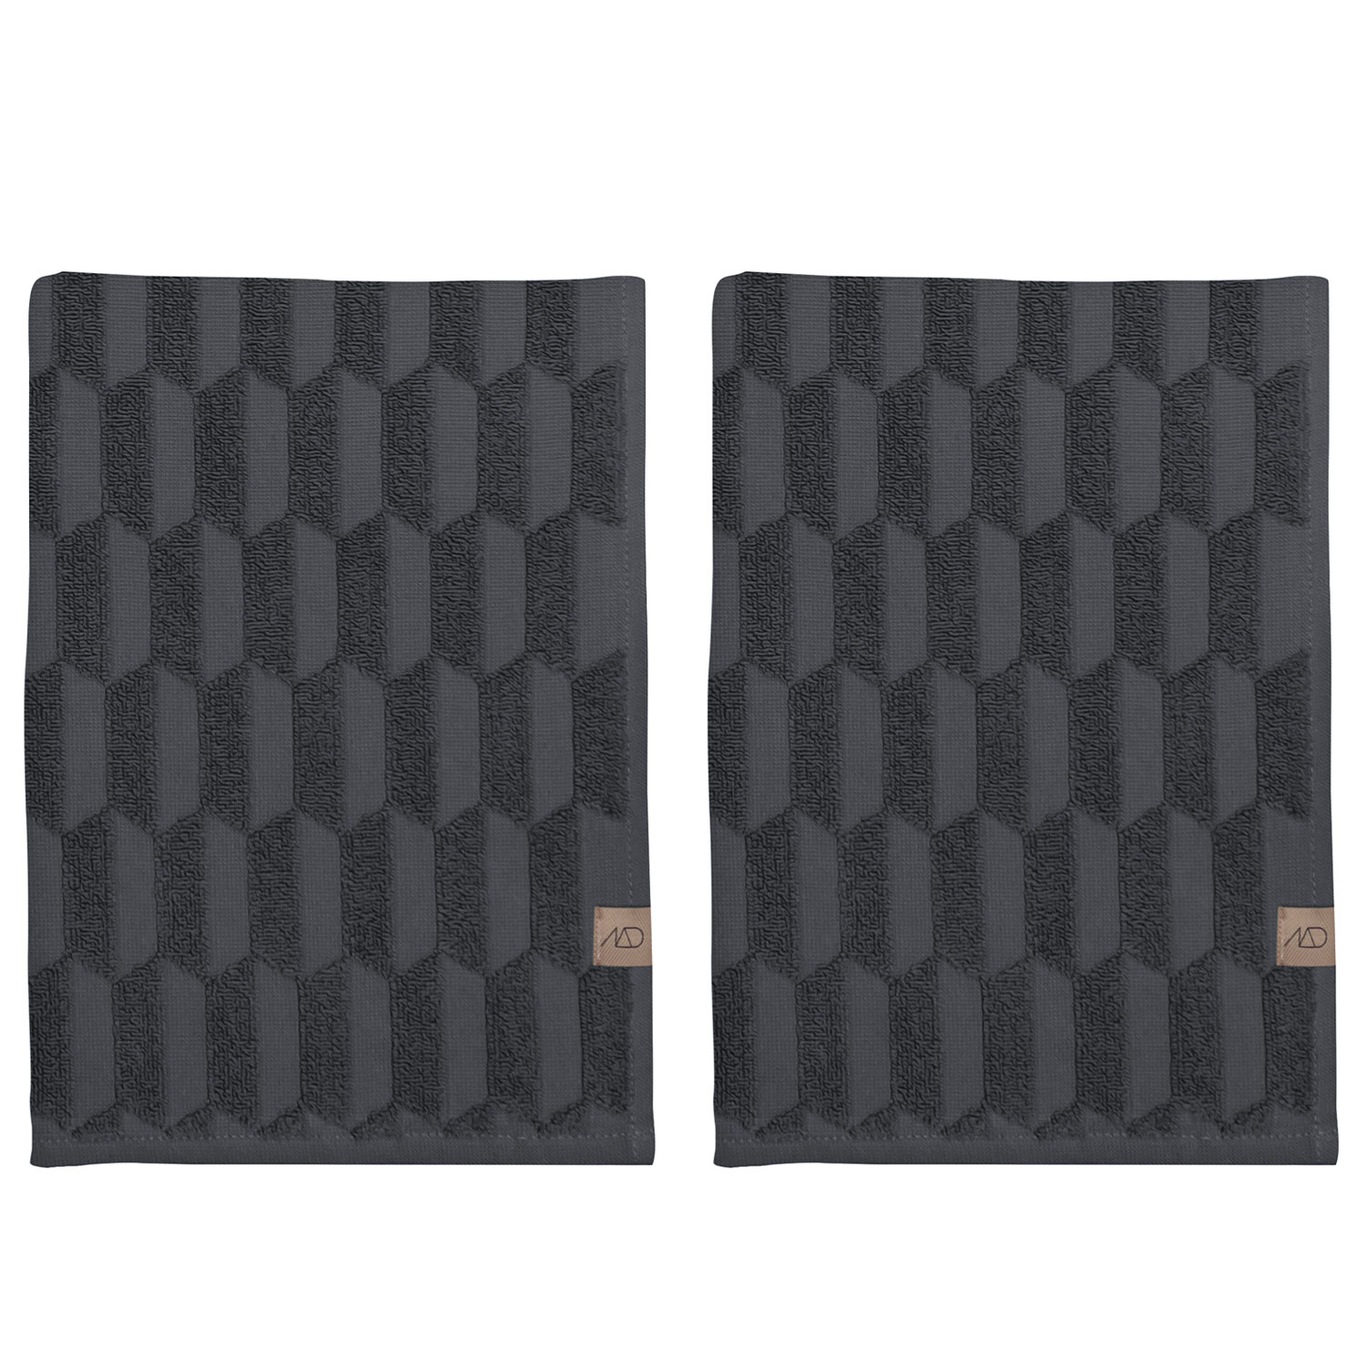 Geo Guest Towel 35x55 cm 2-Pack, Anthracite